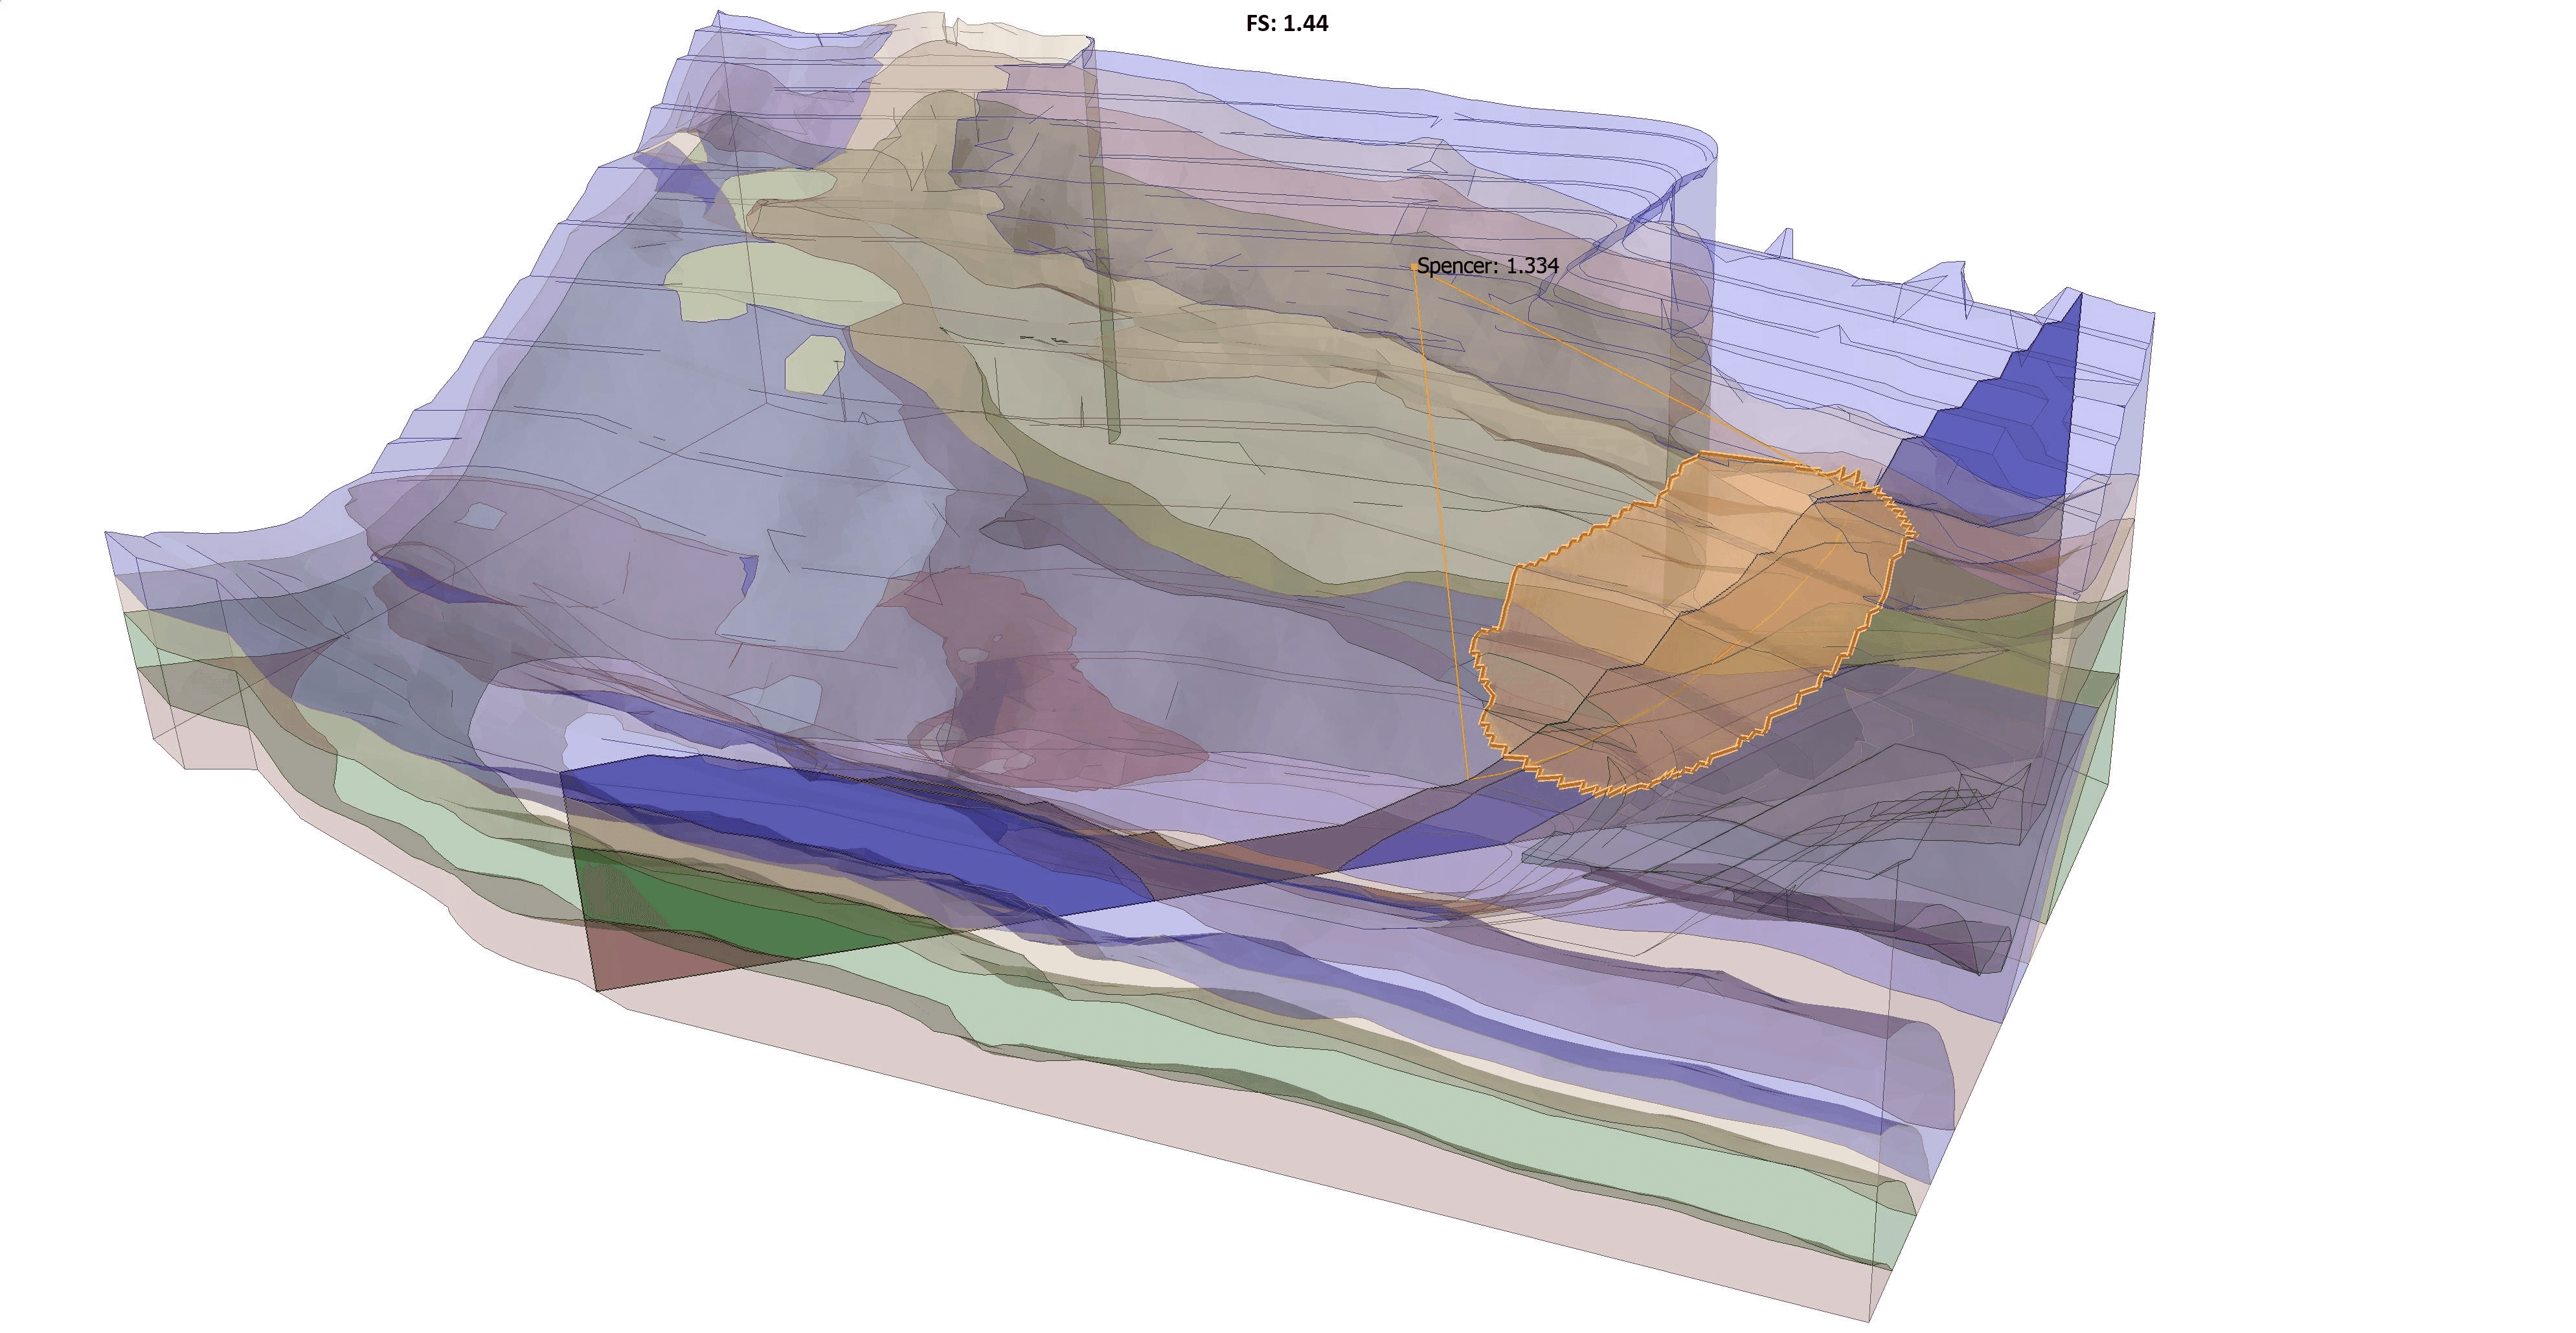 3D model with multiple layers indicating a critical failure region.